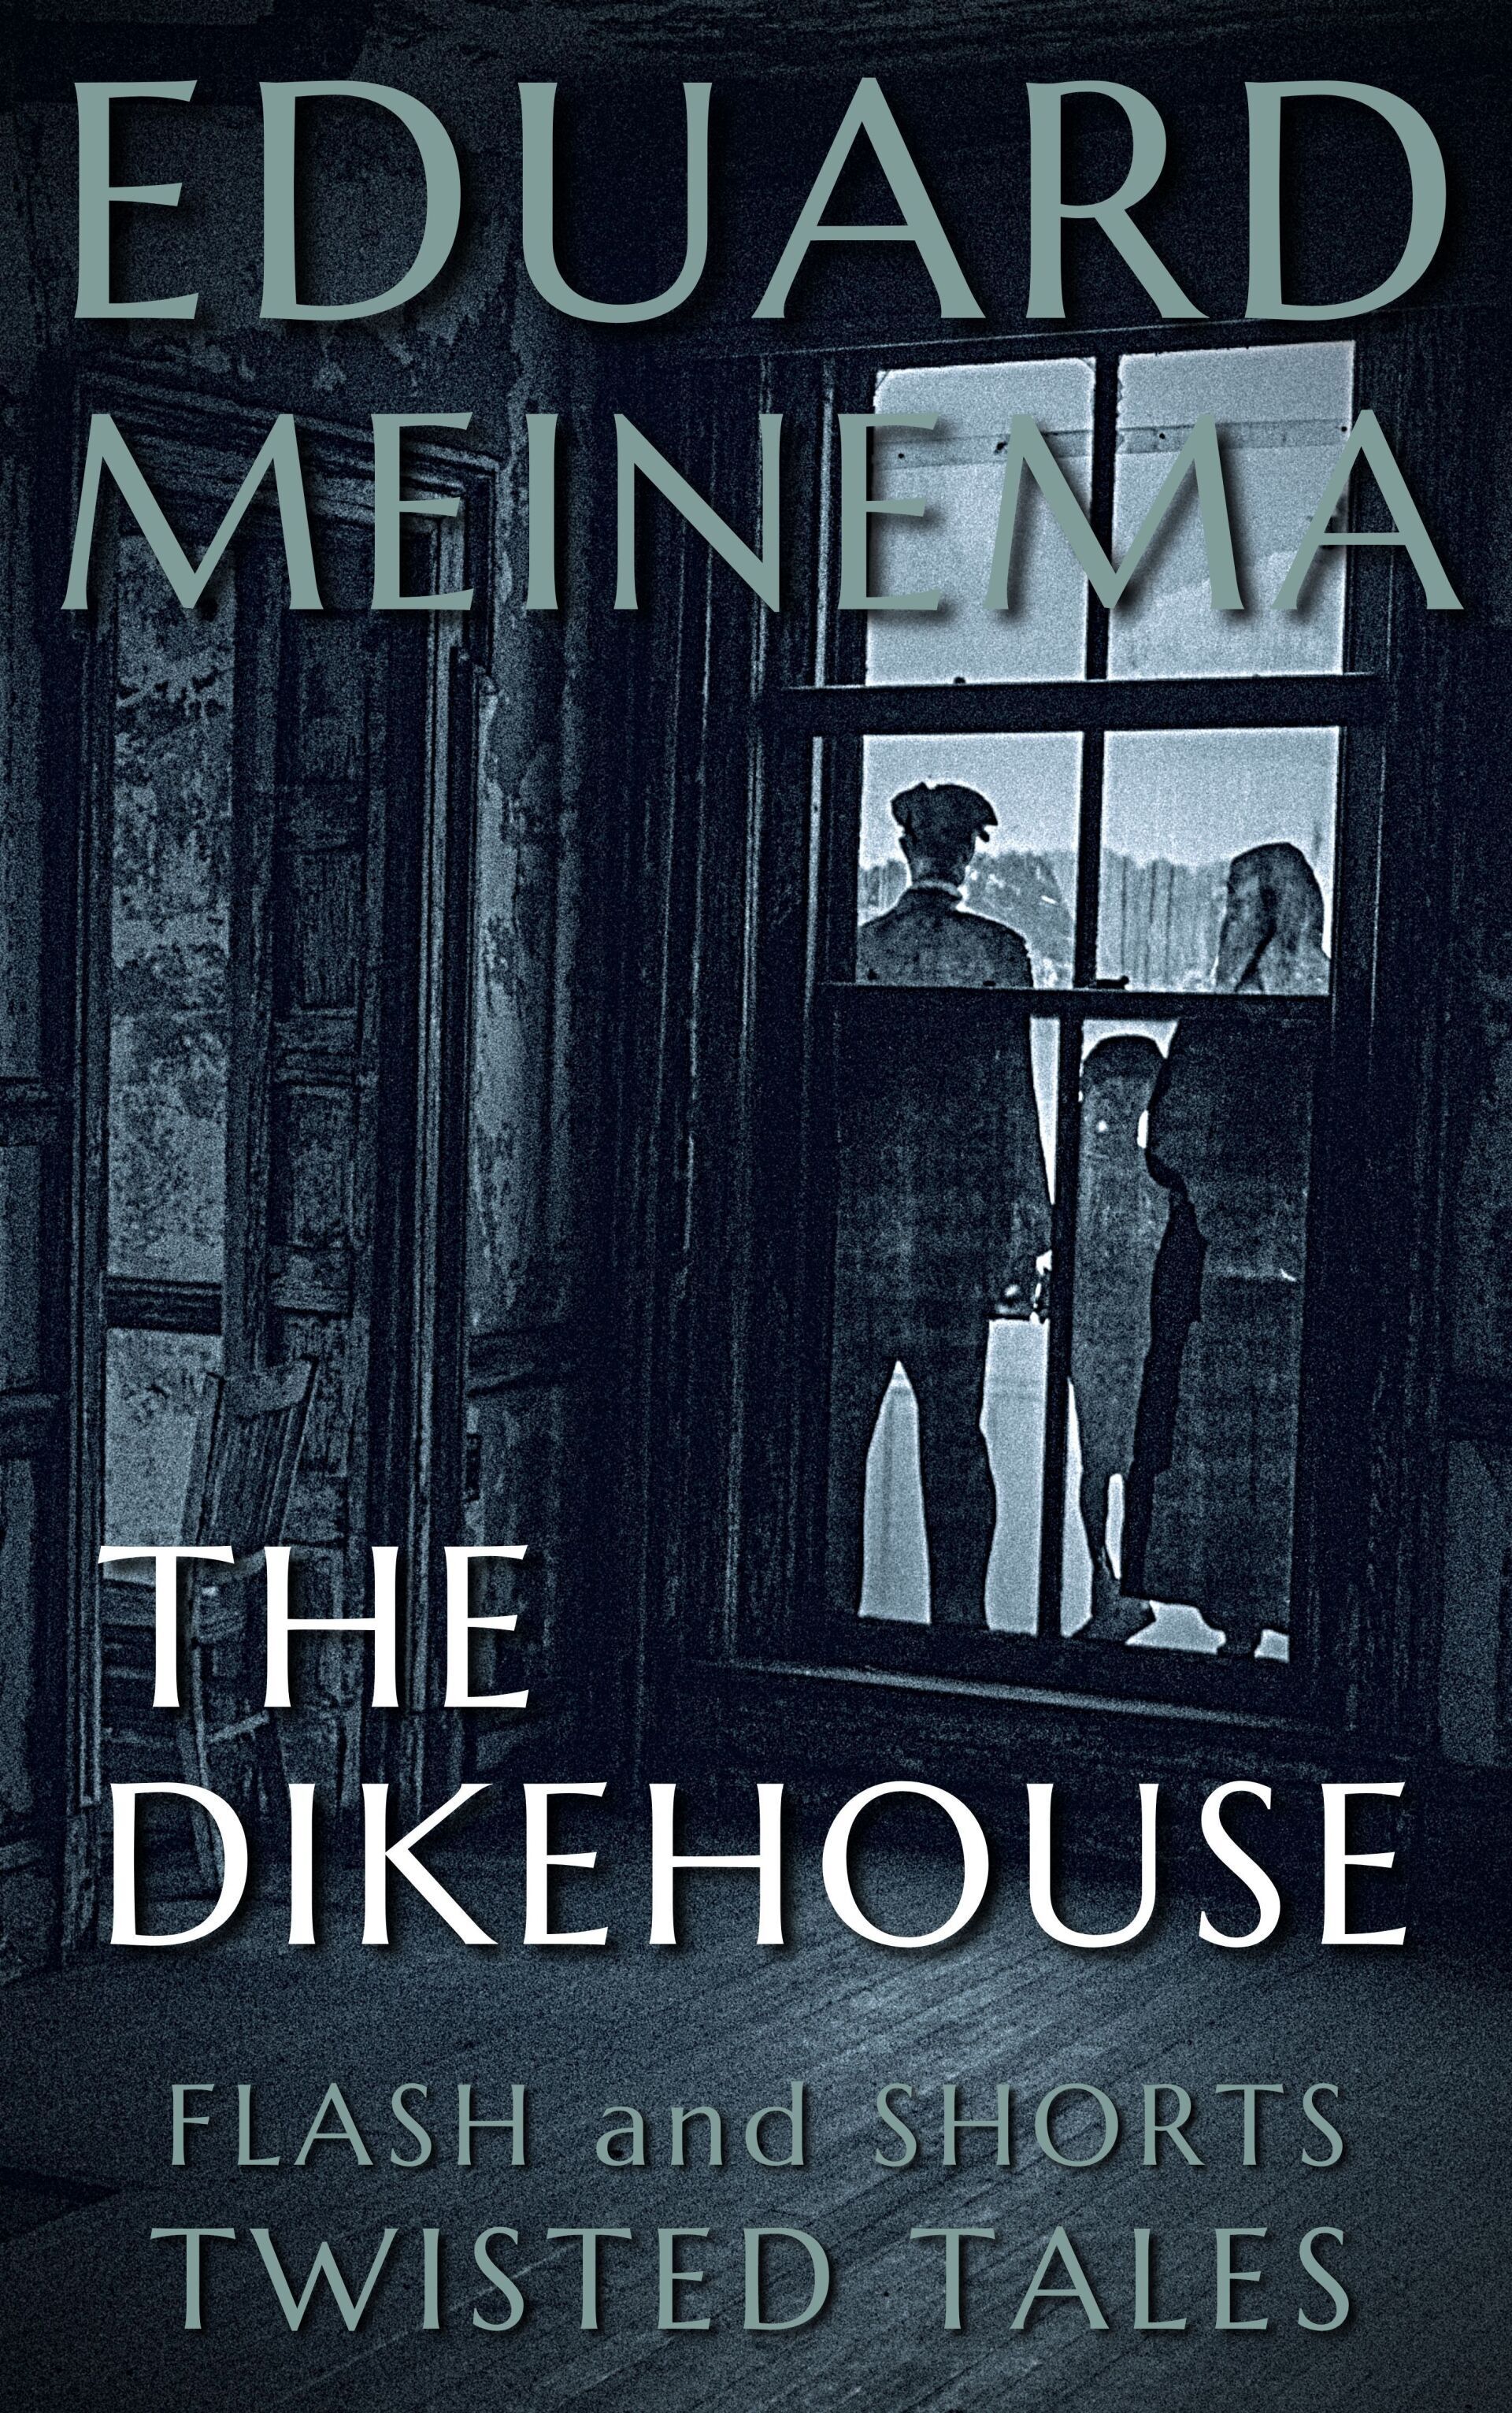 The Dikehouse. A short story by Eduard Meinema